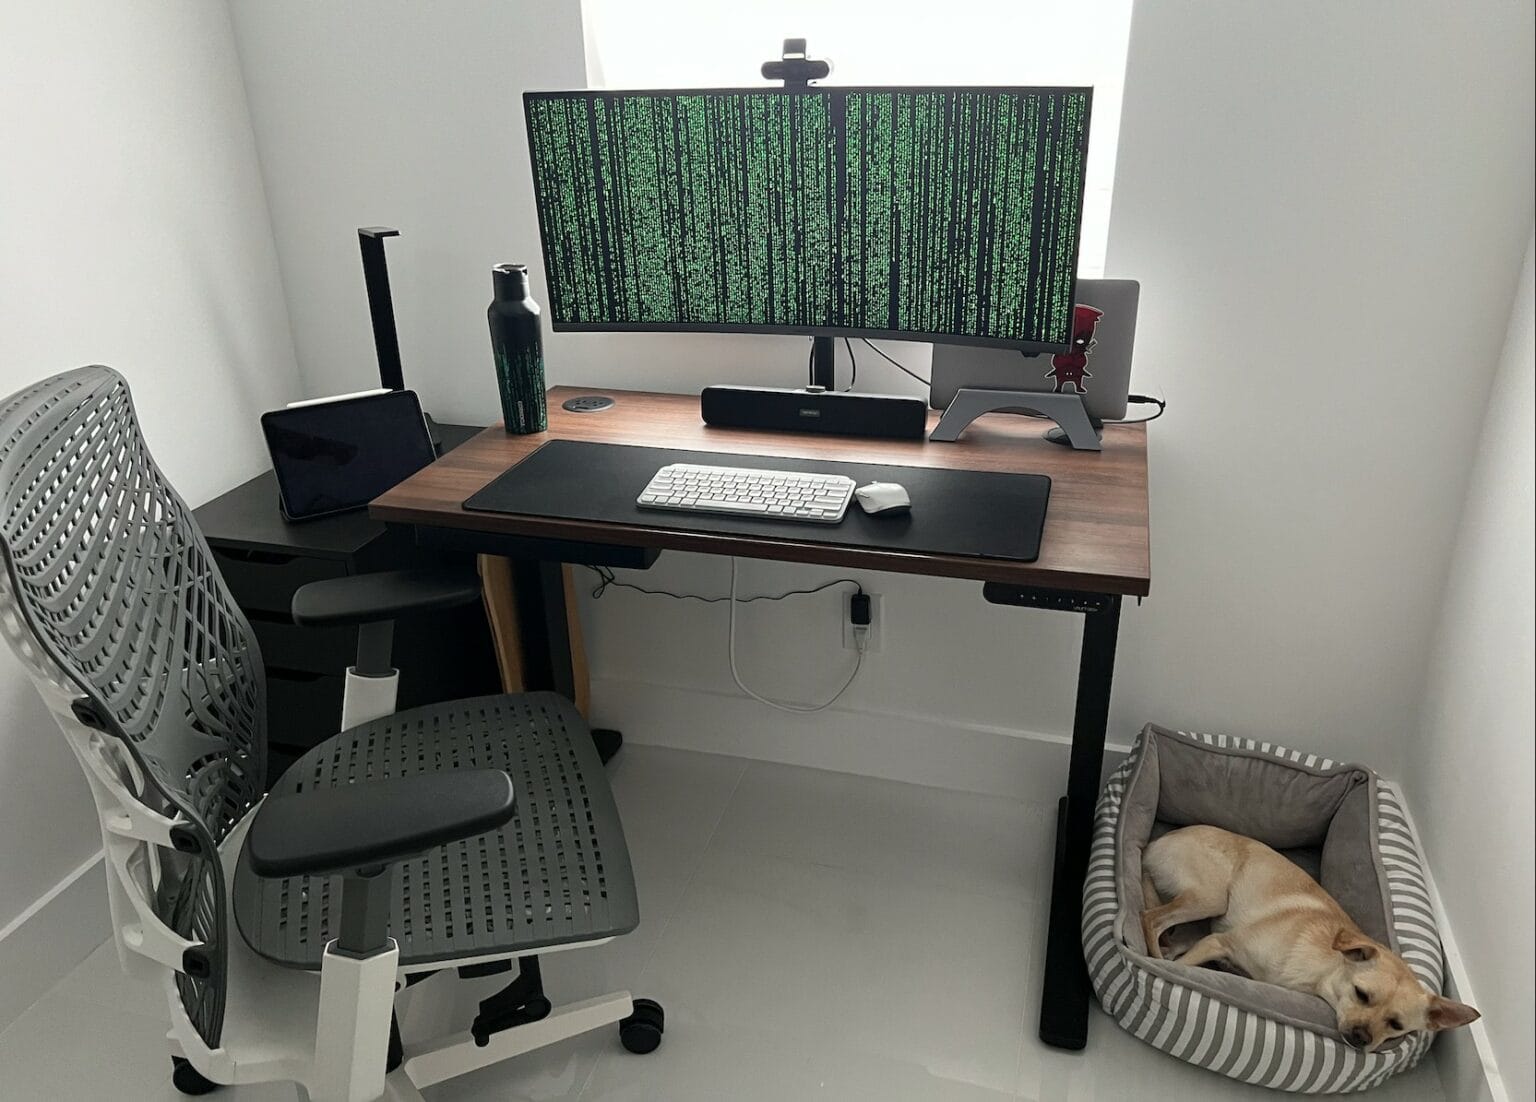 The M1 MacBook Pro and Samsung ultra-wide display form the setup's core, but the canine unit at right is a crucial feature, too.